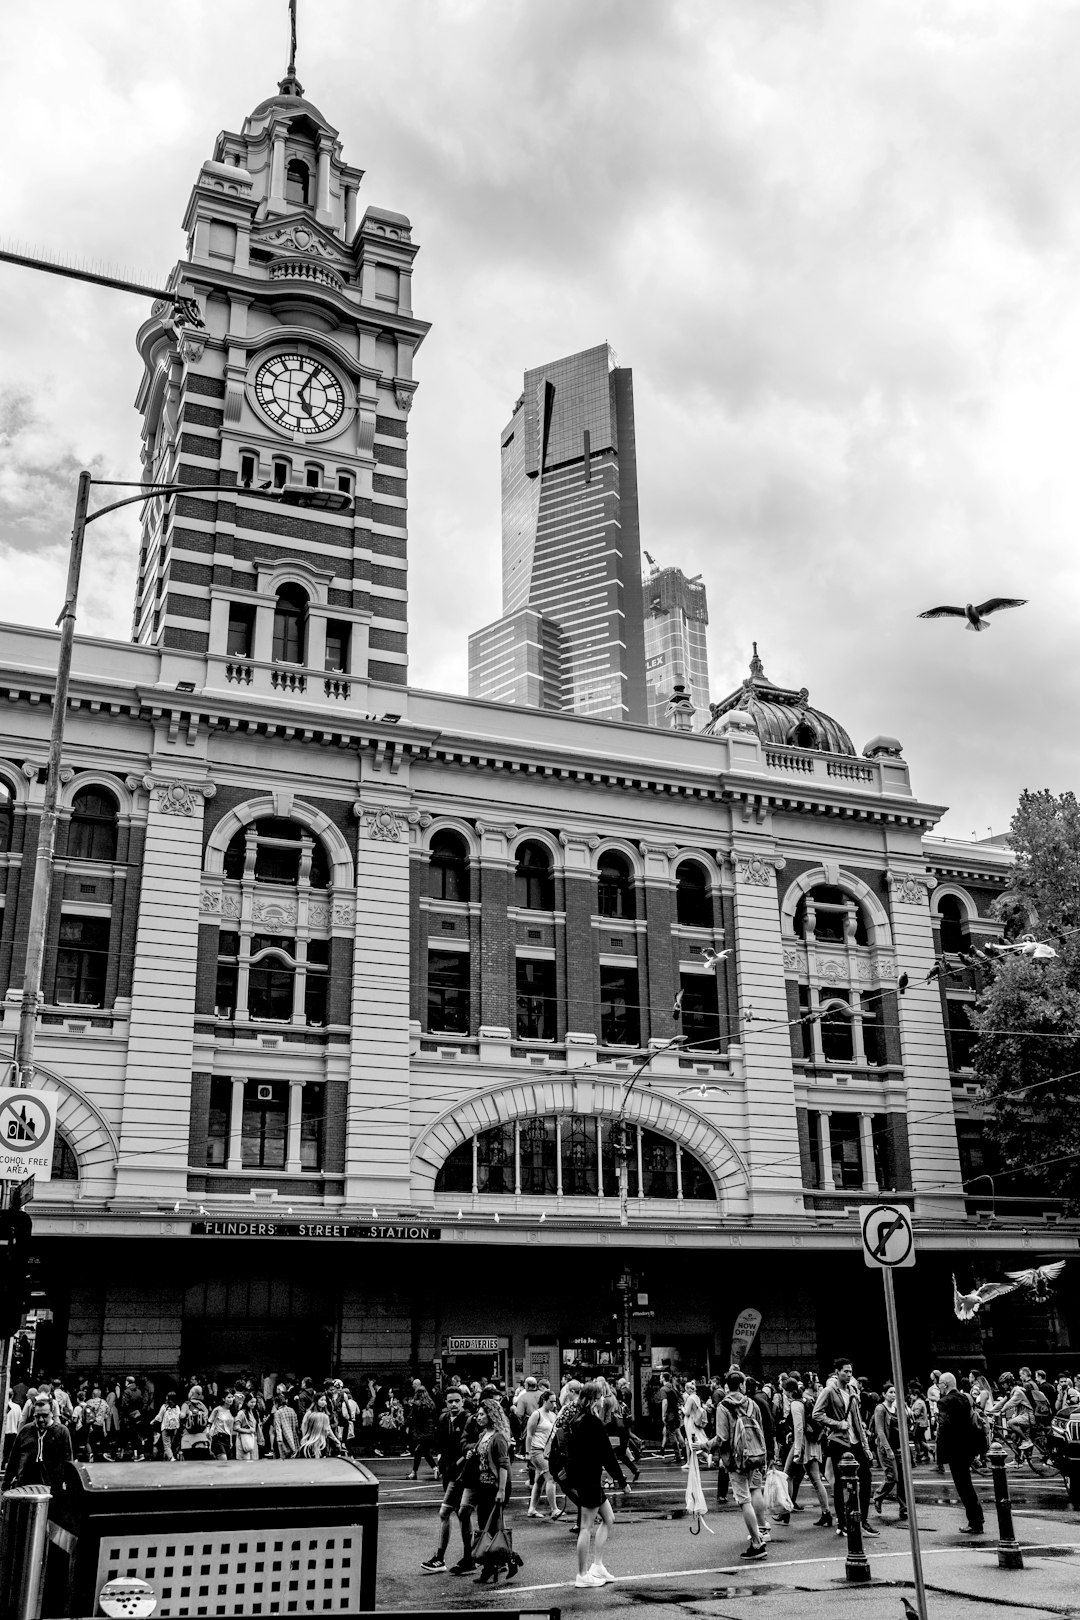 Travel Tips and Stories of Flinders Street Station in Australia